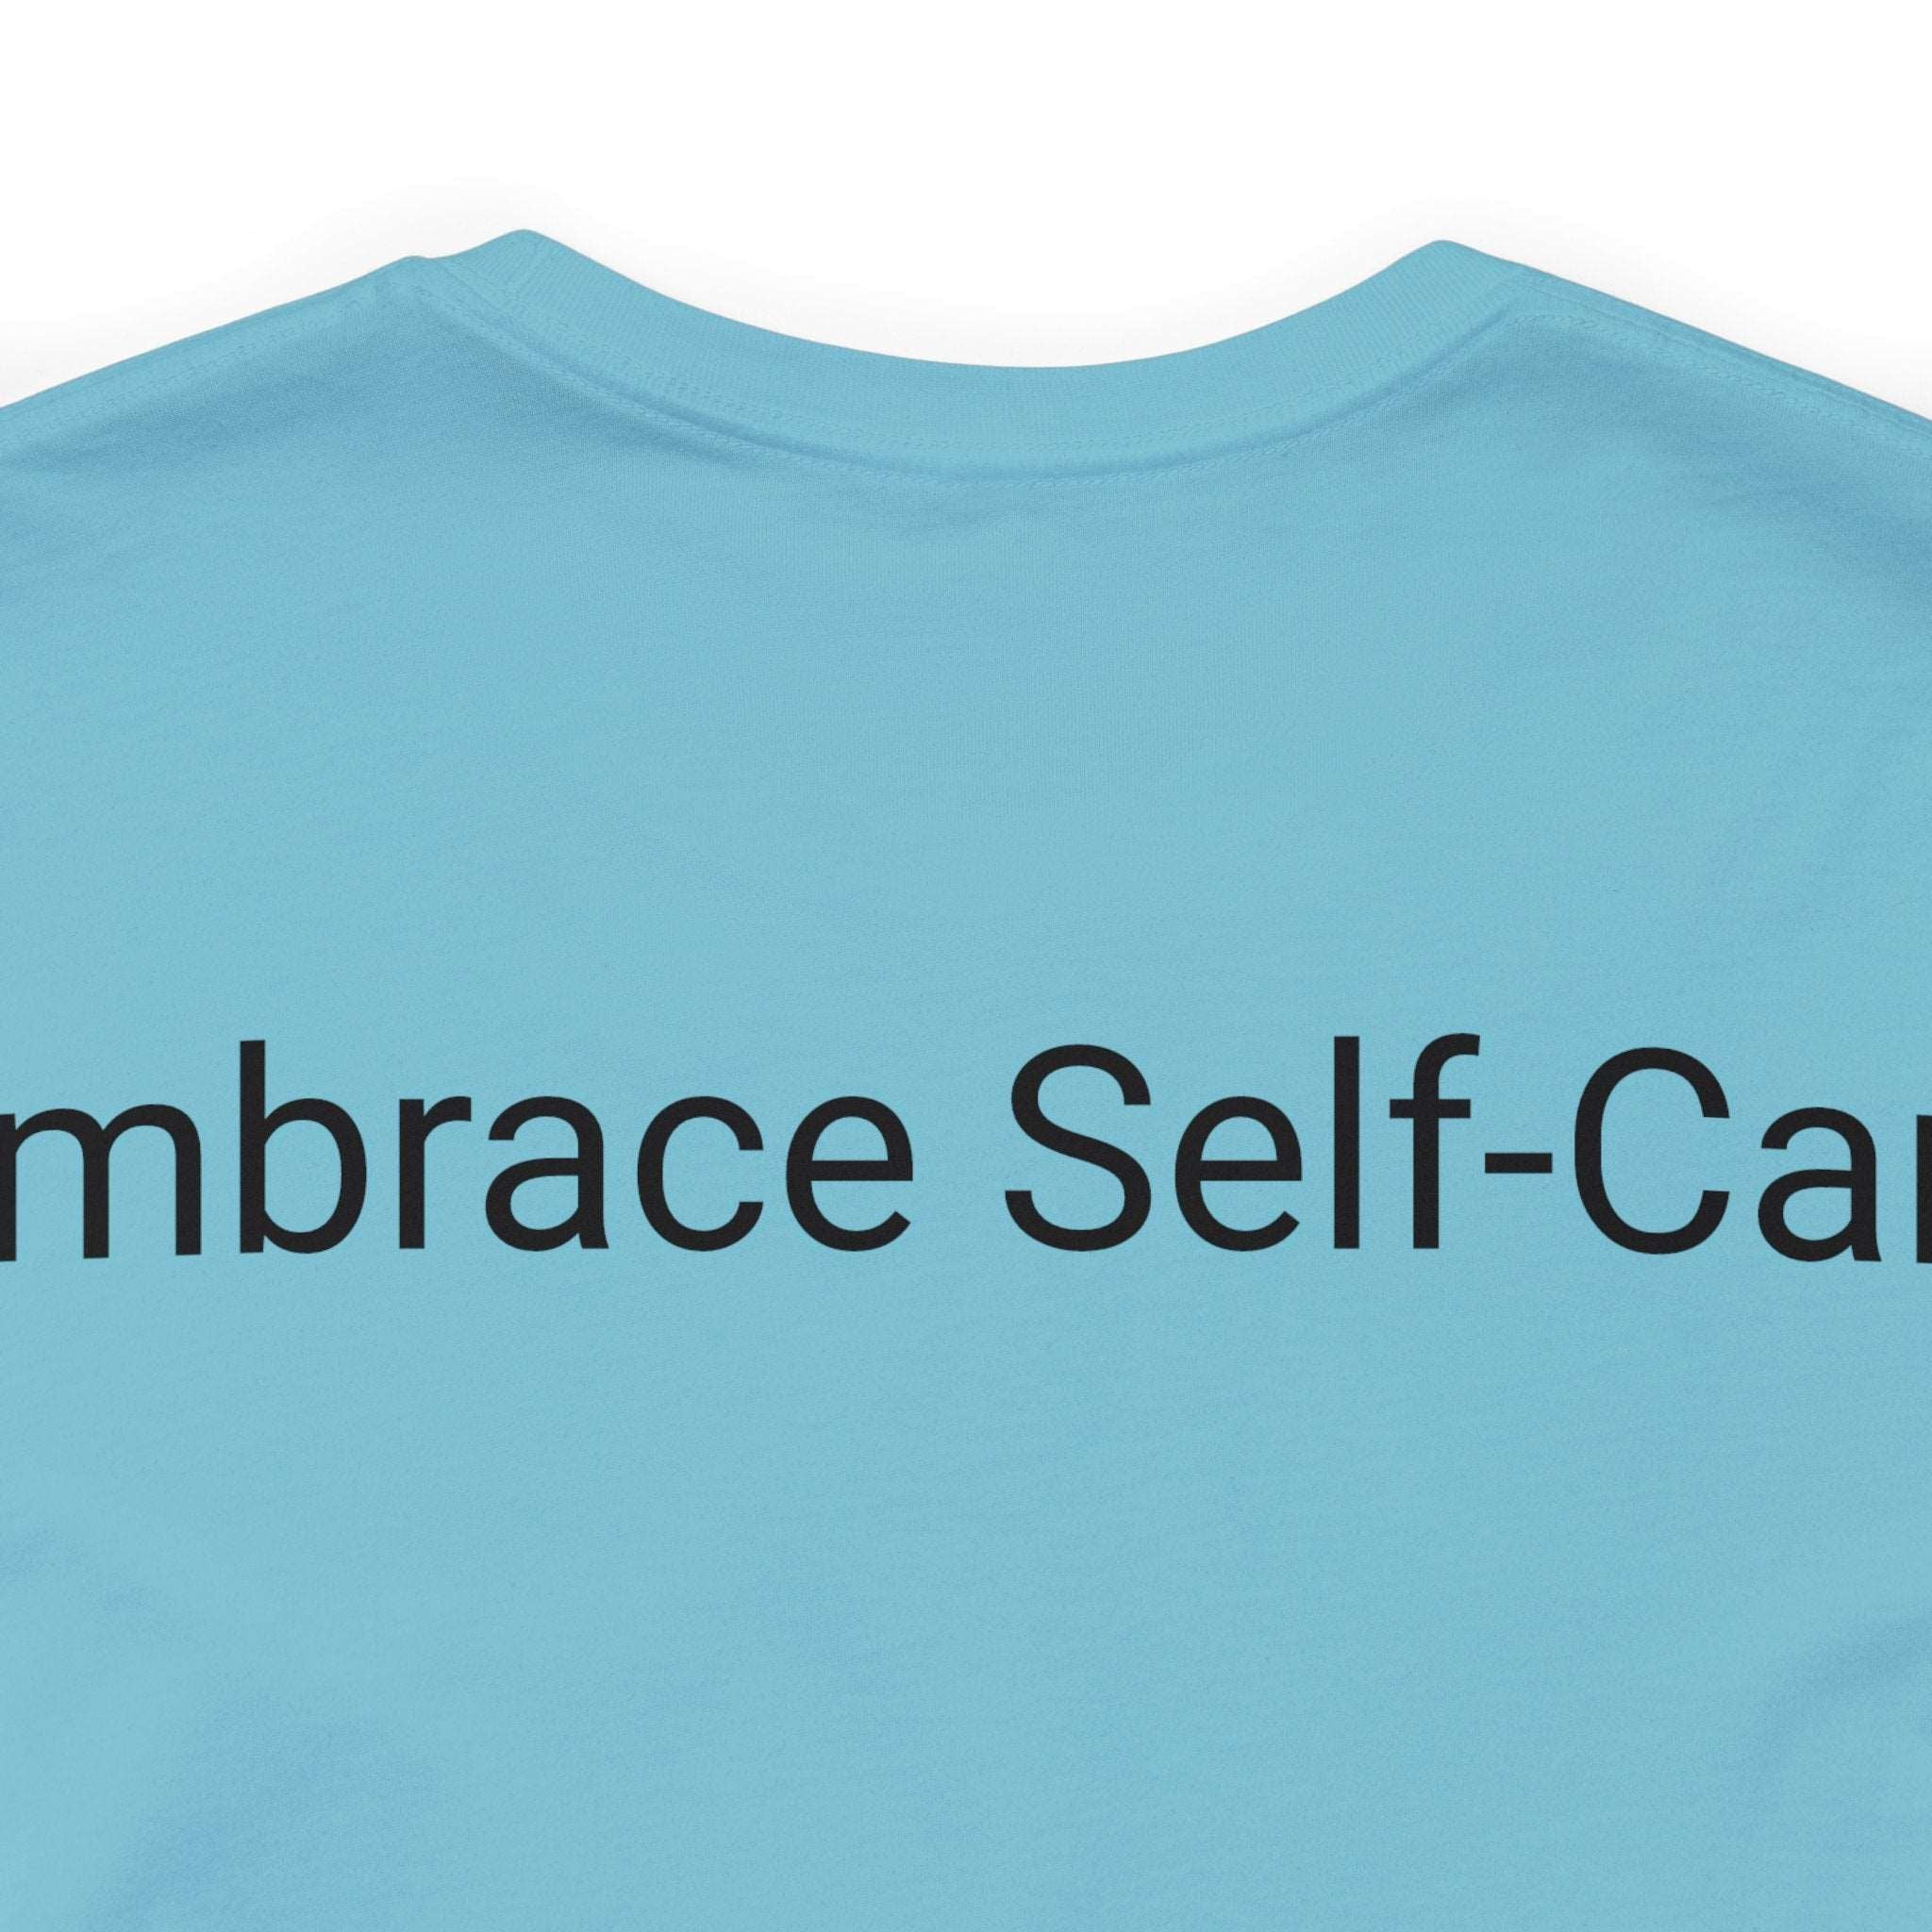 Embrace Self-Care Jersey Tee - Bella+Canvas 3001 Heather Mauve Airlume Cotton Bella+Canvas 3001 Crew Neckline Jersey Short Sleeve Lightweight Fabric Mental Health Support Retail Fit Tear-away Label Tee Unisex Tee T-Shirt 14708835782547081730_2048_b8ccd954-0a1d-4031-a69a-7c0d67f55efb Printify